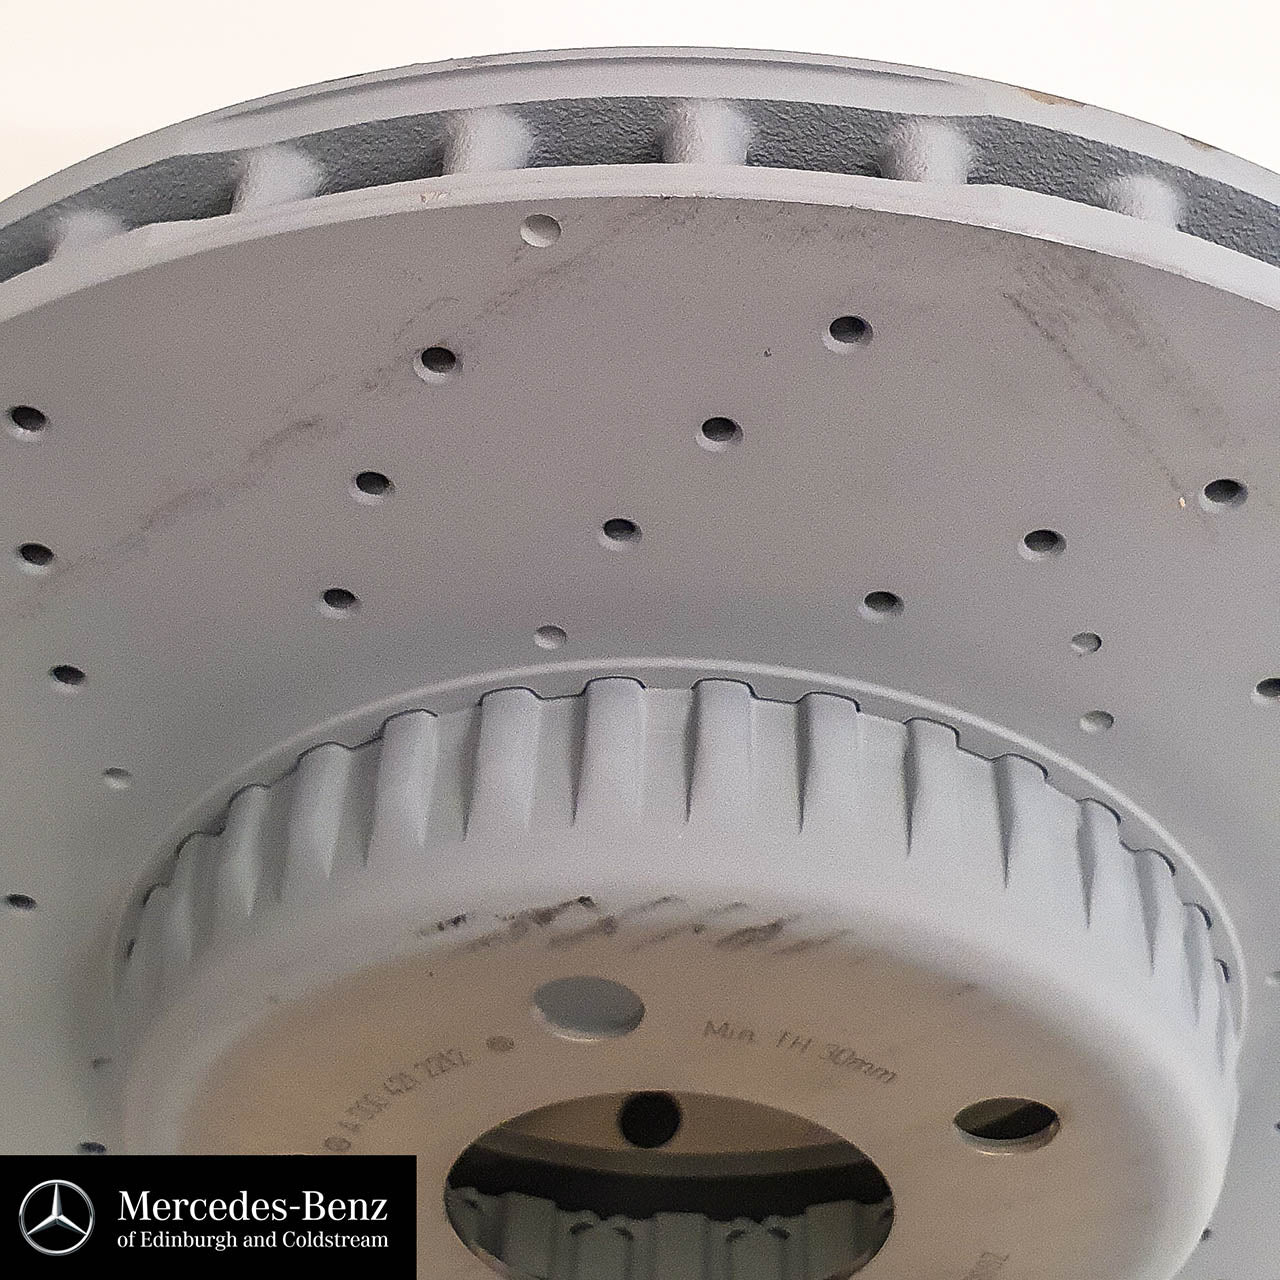 Genuine Mercedes-Benz Compound Front Brake Discs C-Class E-Class with AMG package